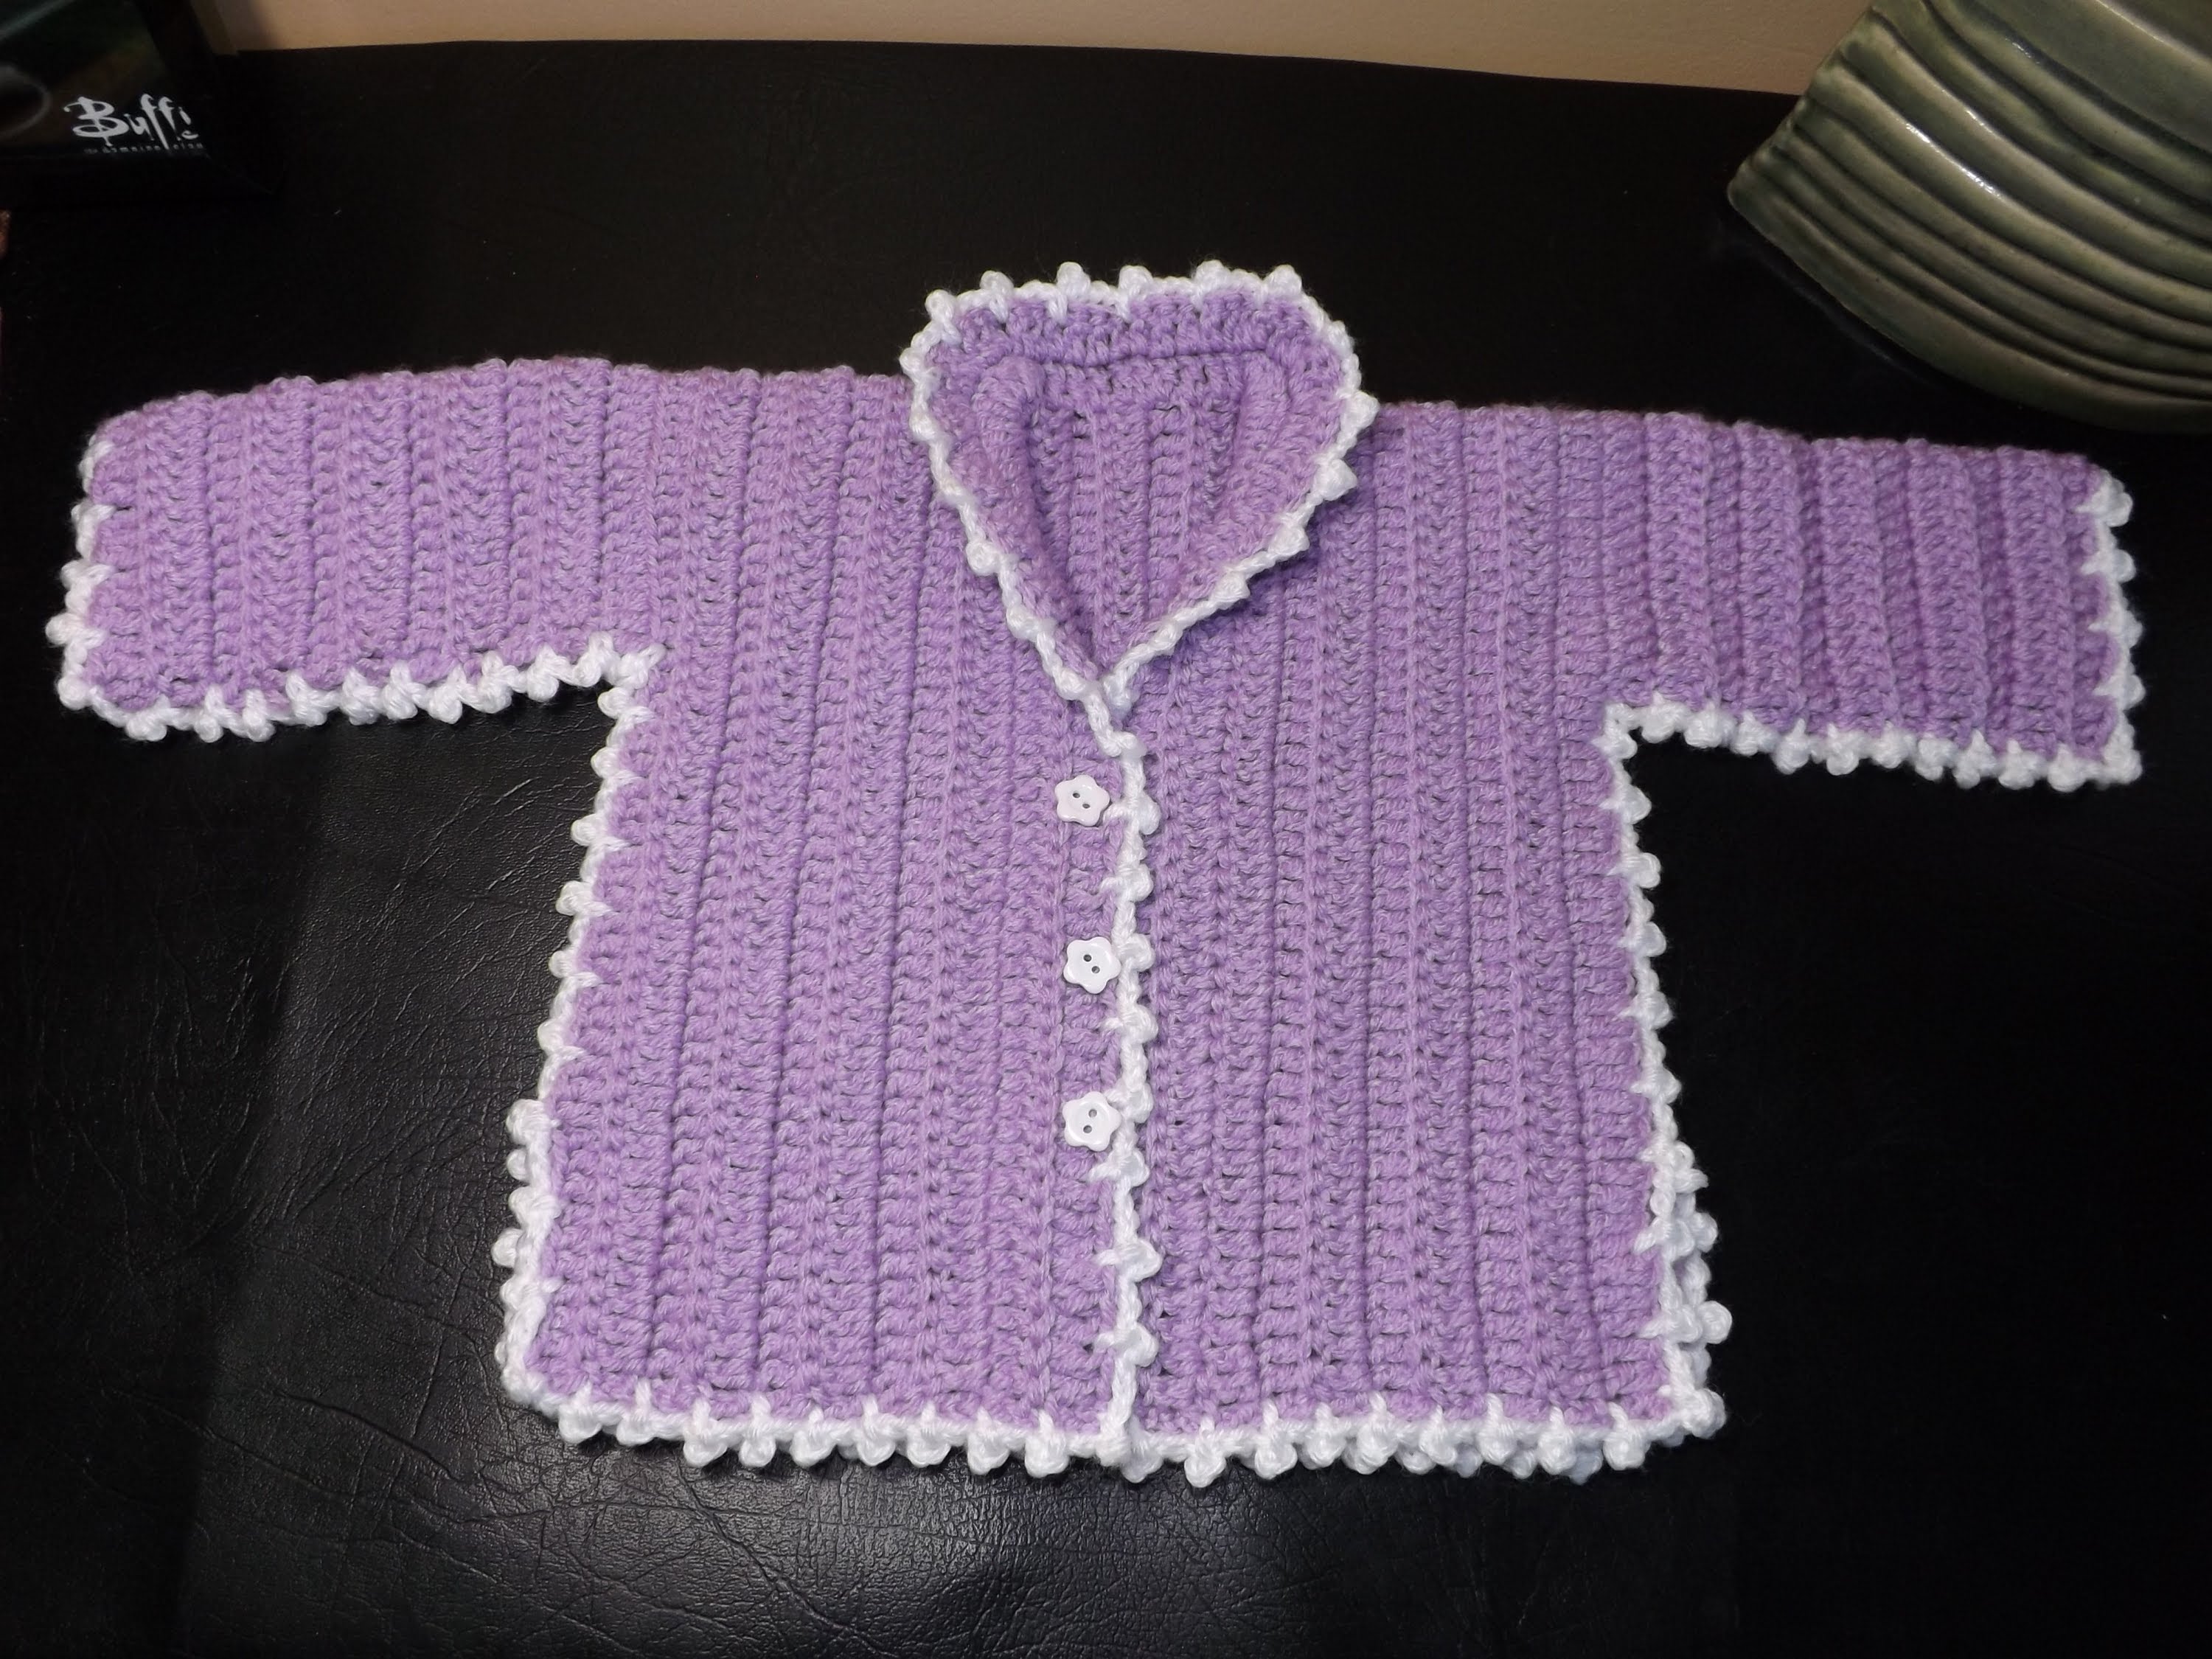 crochet baby sweater how to crochet a baby sweater lilac - with ruby stedman - youtube BBQYJZE